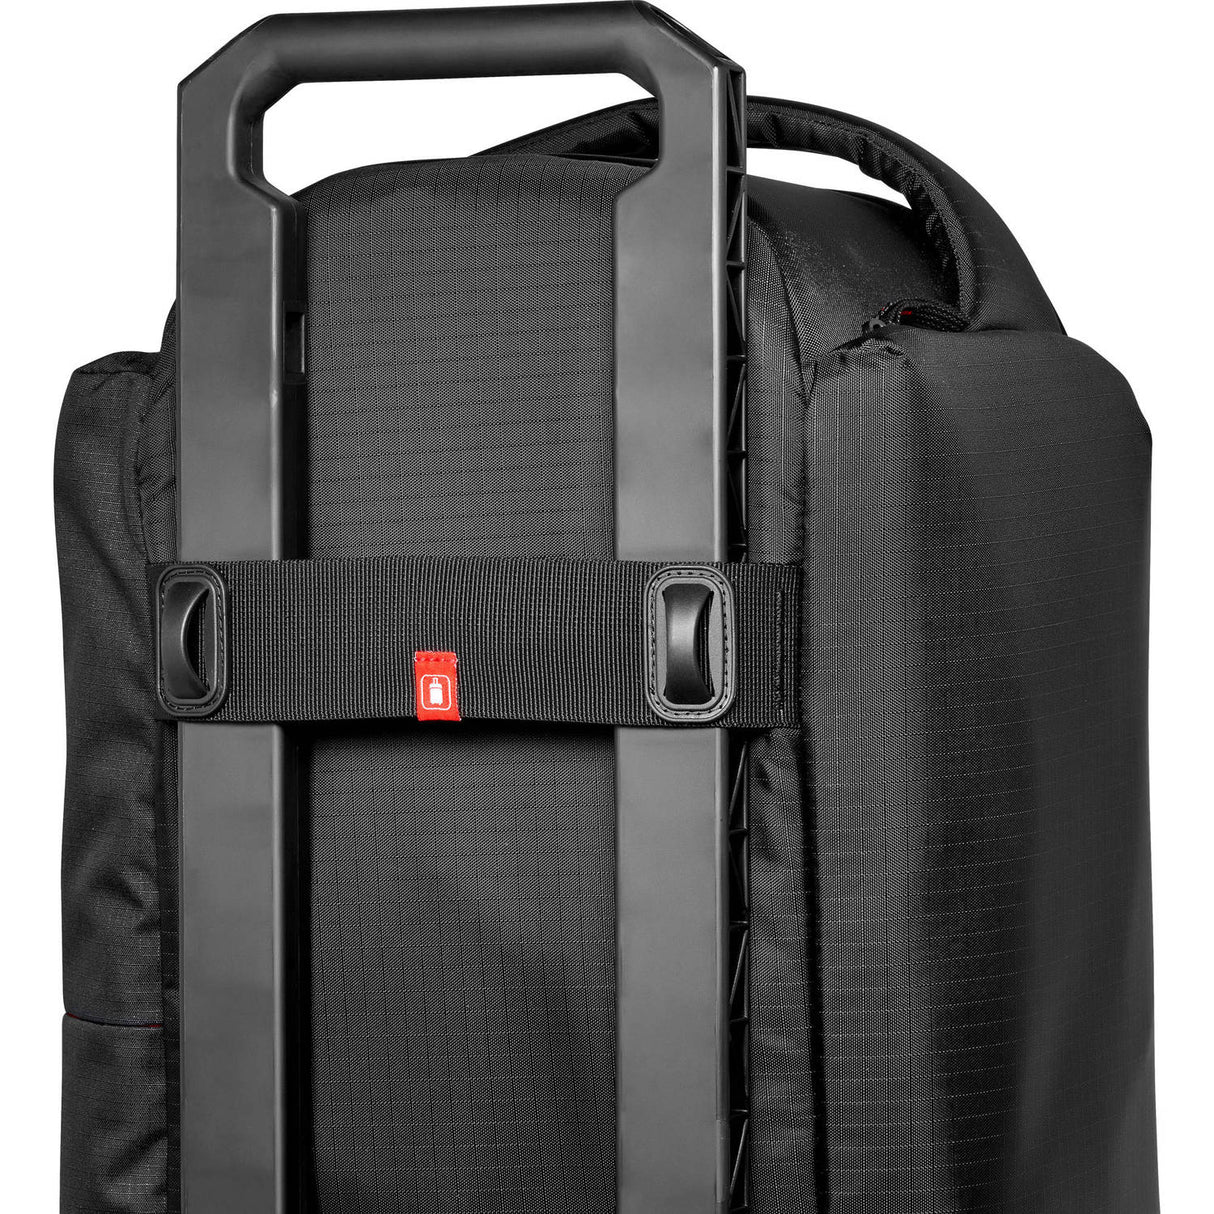 Manfrotto 192N Pro Light Camcorder Case for Canon EOS C100, C300, C500, & Panasonic AG-DVX200 Cameras